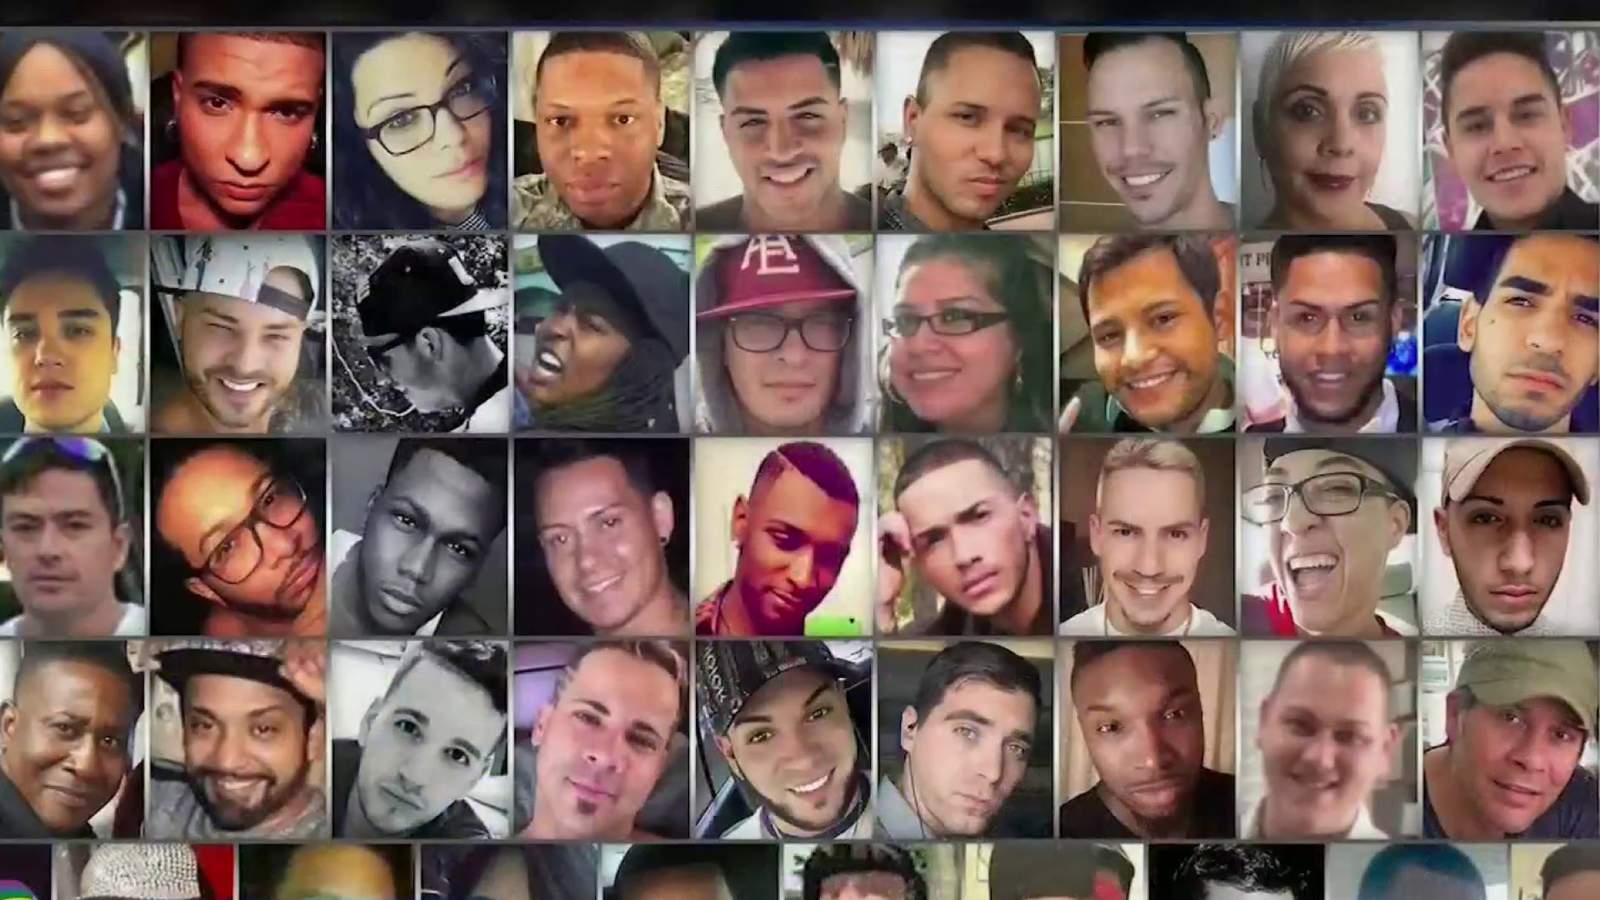 49 bell tolls ring throughout Orlando, 4 years after Pulse nightclub attack